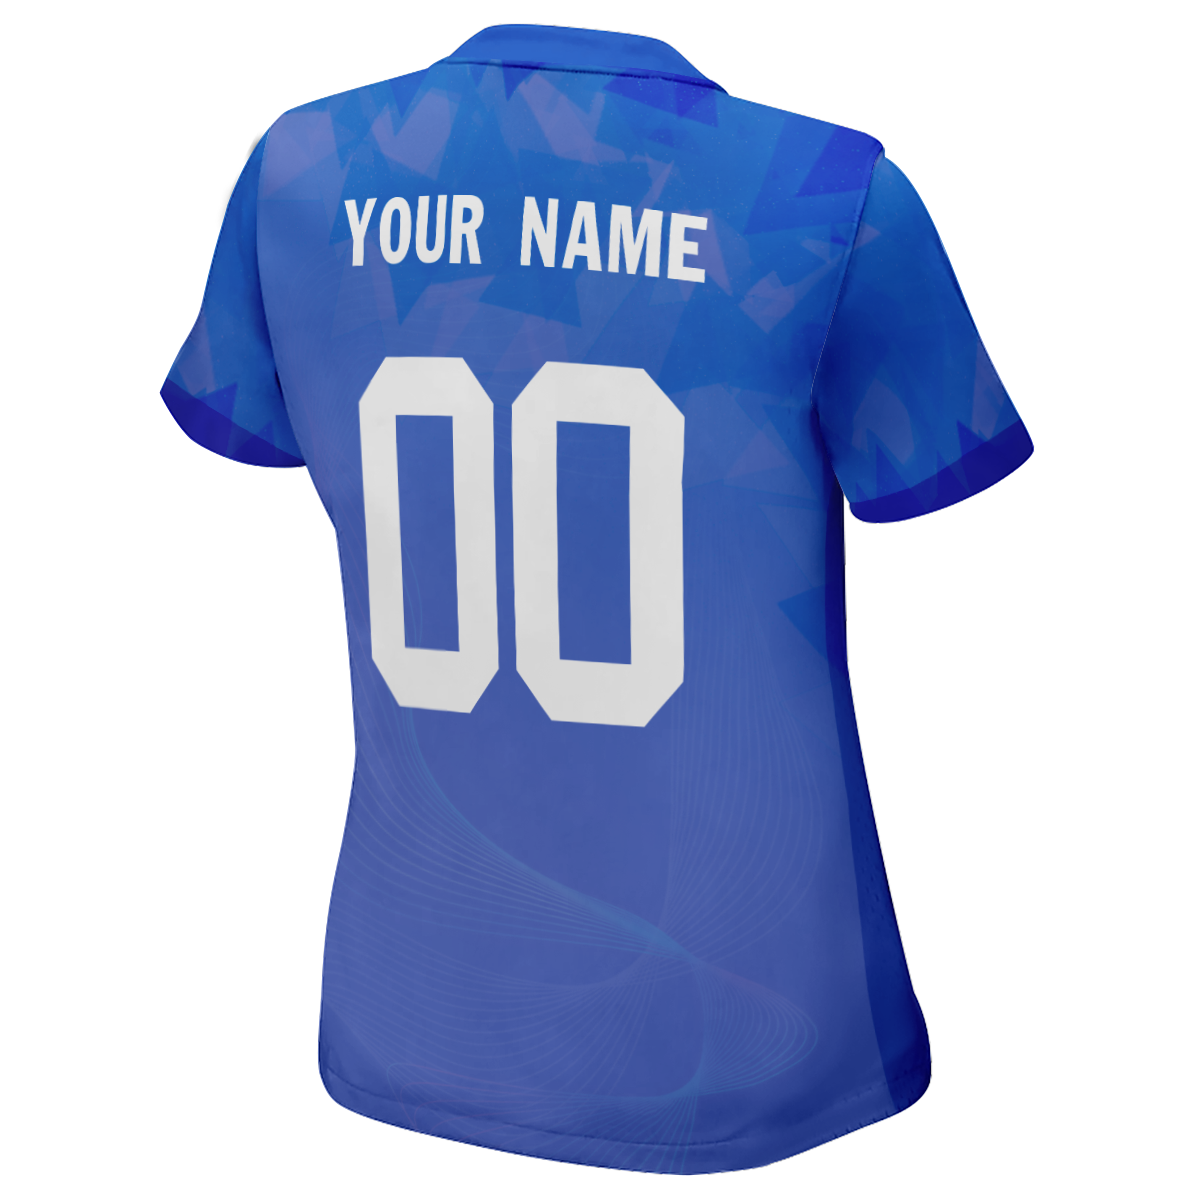 Women's Authentic Brazil World Cup Custom Soccer Jersey With Name